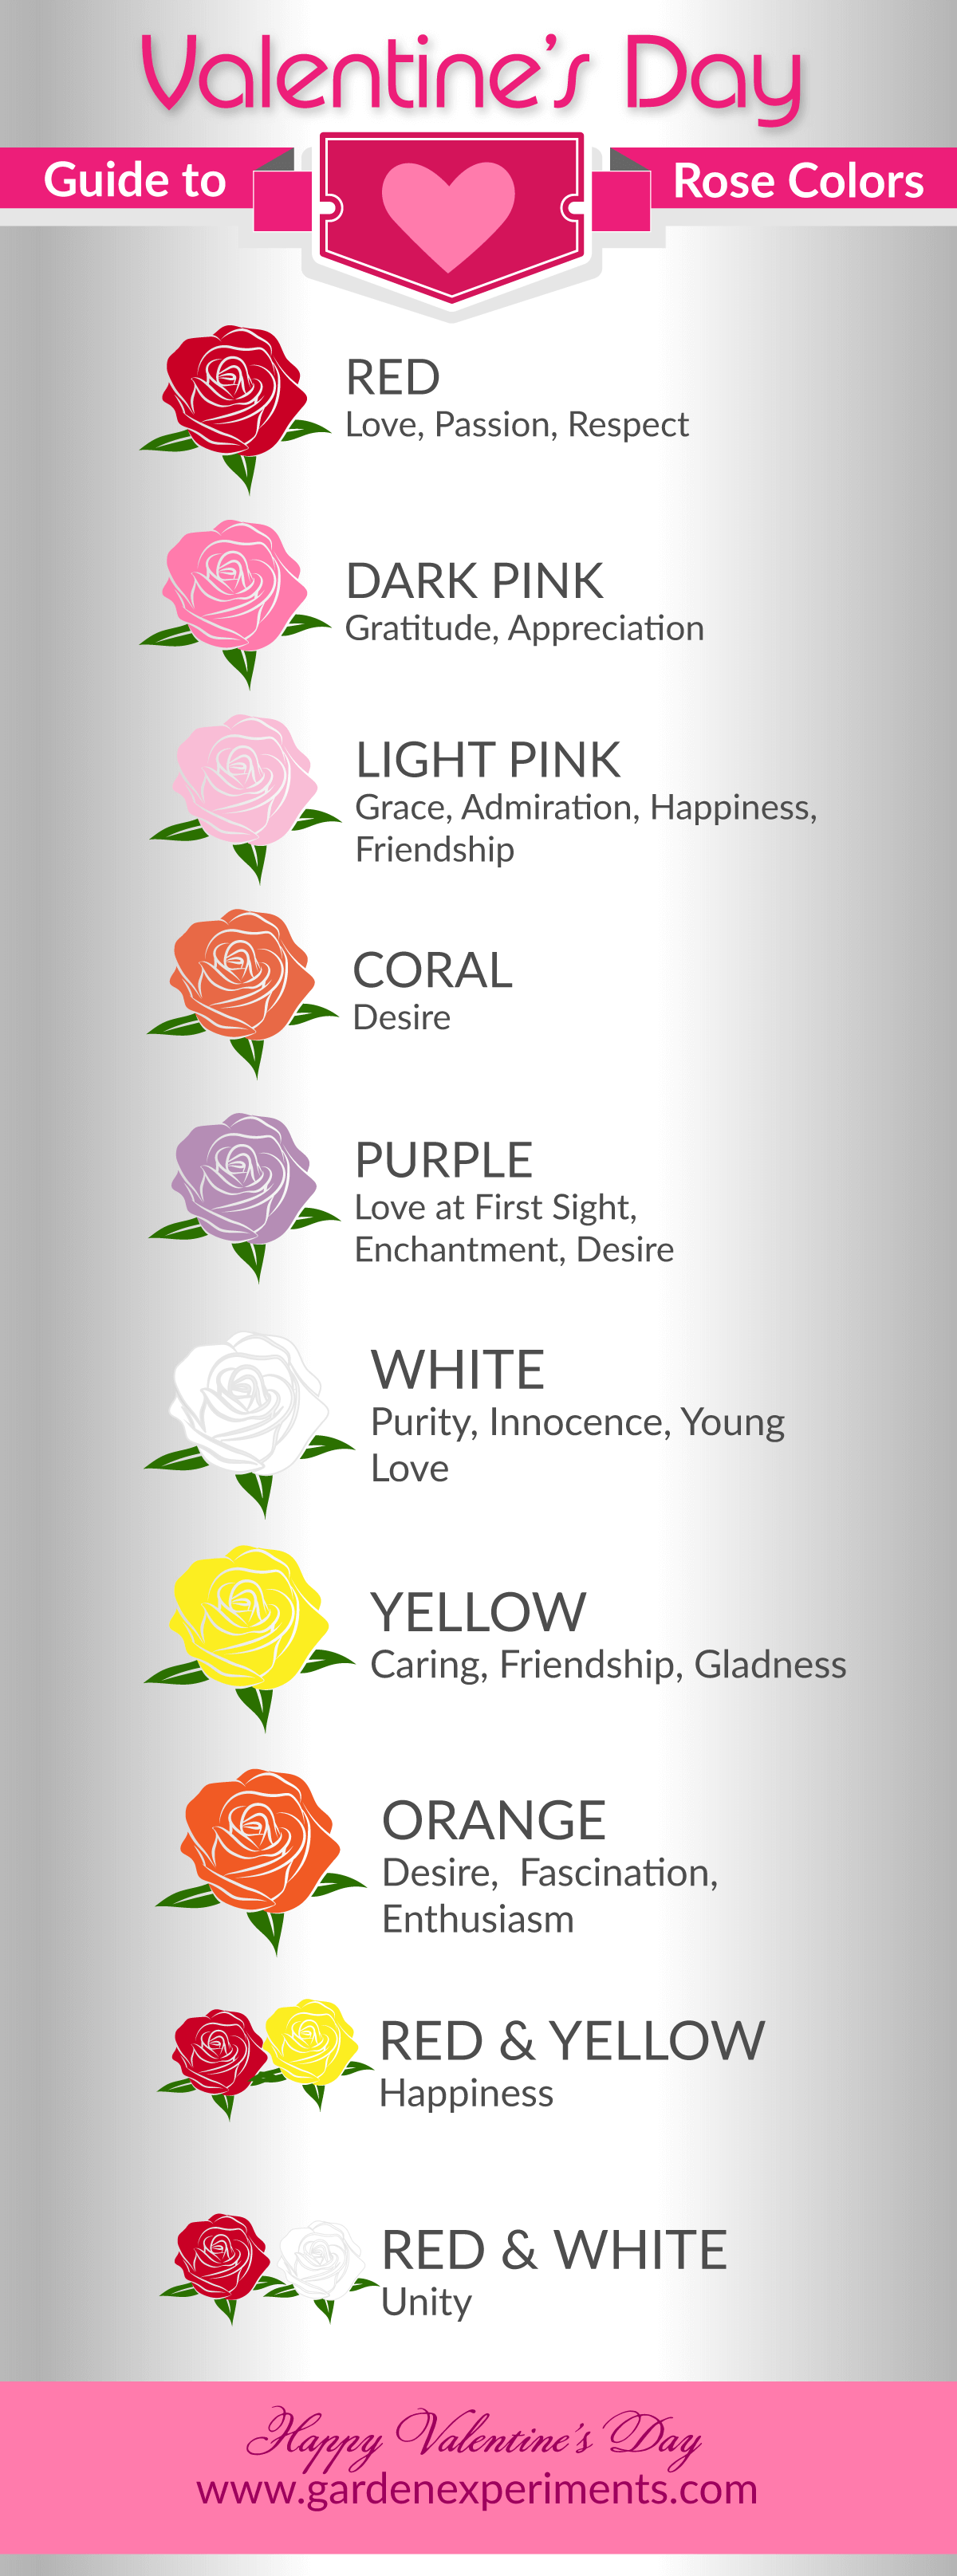 Rose Color Meanings